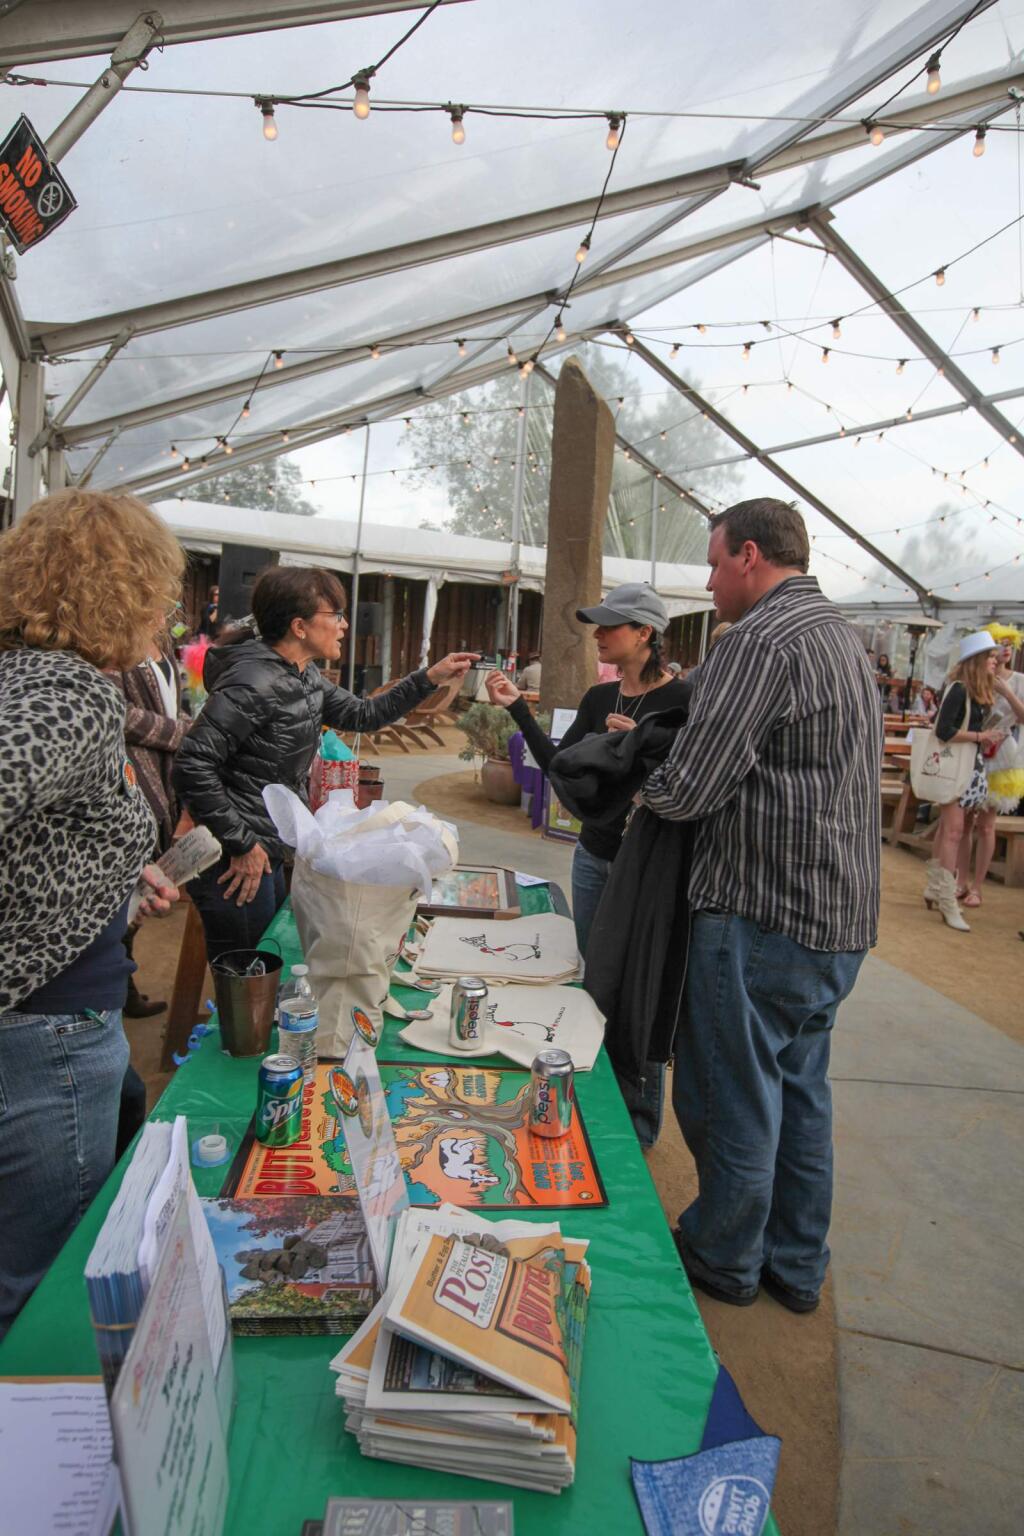 Mike Harris checks out the raffle goods at the Butter and Egg Days Kickoff Party Fundraiser at Lagunitas Brewery on Monday, April 6th, 2015. (Victoria Webb/For The Argus-Courier)